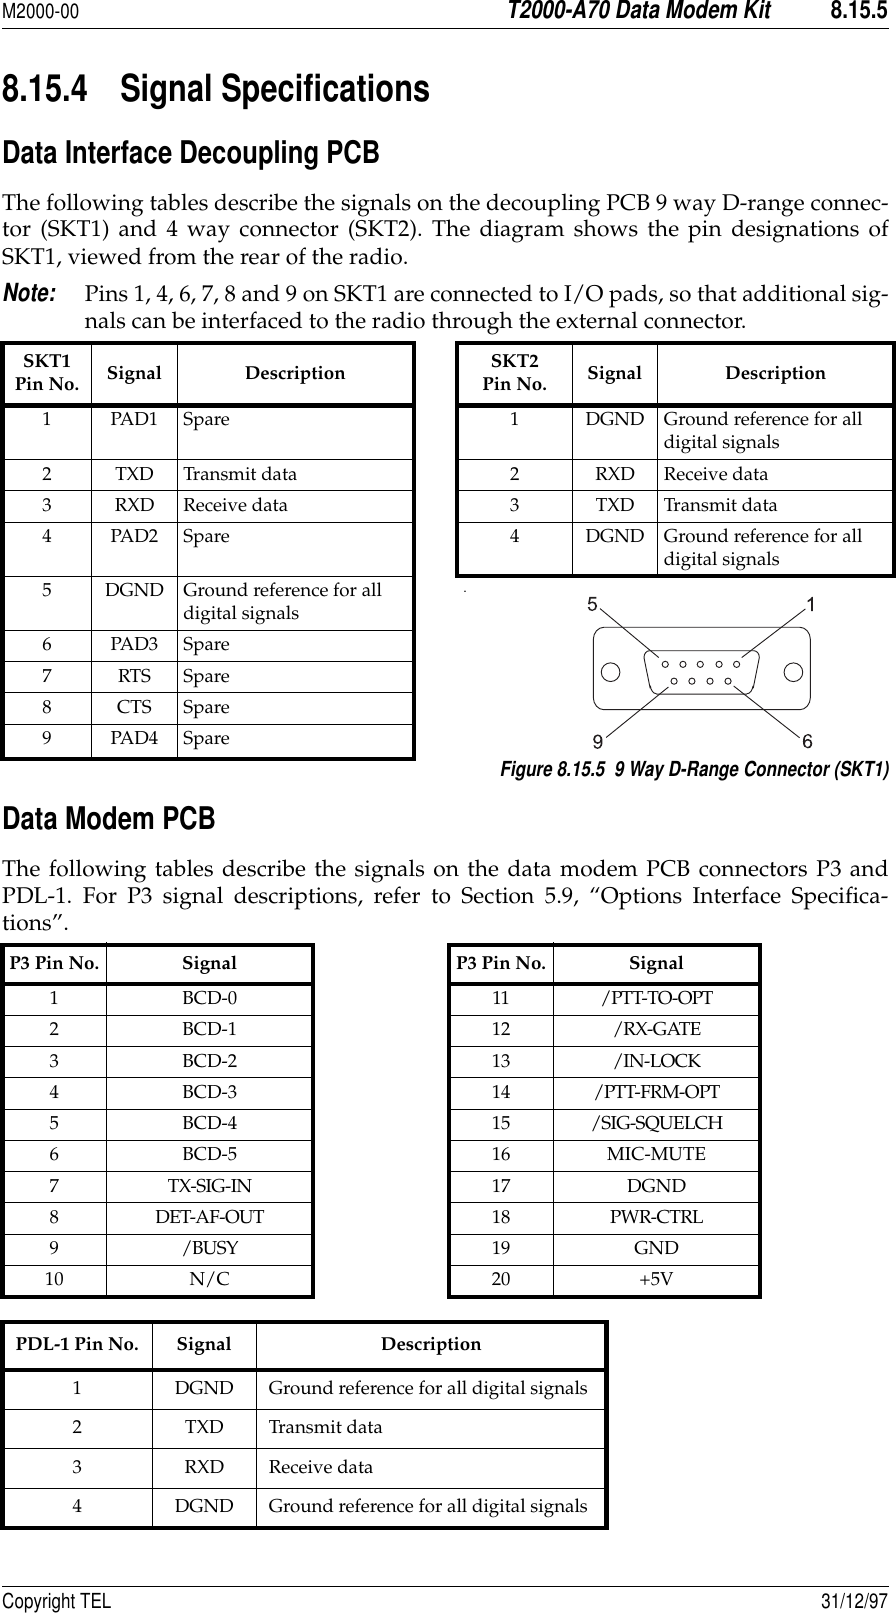 M2000-00T2000-A70 Data Modem Kit8.15.5Copyright TEL 31/12/978.15.4 Signal Specifications Data Interface Decoupling PCB The following tables describe the signals on the decoupling PCB 9 way D-range connec-tor (SKT1) and 4 way connector (SKT2). The diagram shows the pin designations ofSKT1, viewed from the rear of the radio.Note:Pins 1, 4, 6, 7, 8 and 9 on SKT1 are connected to I/O pads, so that additional sig-nals can be interfaced to the radio through the external connector.Figure 8.15.5  9 Way D-Range Connector (SKT1)Data Modem PCBThe following tables describe the signals on the data modem PCB connectors P3 andPDL-1. For P3 signal descriptions, refer to Section 5.9, “Options Interface Specifica-tions”.SKT1 Pin No. Signal Description SKT2Pin No. Signal Description1 PAD1 Spare 1 DGND Ground reference for all digital signals2 TXD Transmit data 2 RXD Receive data3 RXD Receive data 3 TXD Transmit data4 PAD2 Spare 4 DGND Ground reference for all digital signals5 DGND Ground reference for all digital signals.6PAD3Spare7RTSSpare8CTSSpare9PAD4SpareP3 Pin No. Signal P3 Pin No. Signal1BCD-0 11/PTT-TO-OPT2BCD-1 12/RX-GATE3BCD-2 13/IN-LOCK4 BCD-3 14 /PTT-FRM-OPT5BCD-4 15/SIG-SQUELCH6 BCD-5 16 MIC-MUTE7TX-SIG-IN 17 DGND8DET-AF-OUT 18 PWR-CTRL9/BUSY 19GND10 N/C 20 +5VPDL-1 Pin No. Signal Description1 DGND Ground reference for all digital signals2 TXD Transmit data3RXDReceive data4 DGND Ground reference for all digital signals